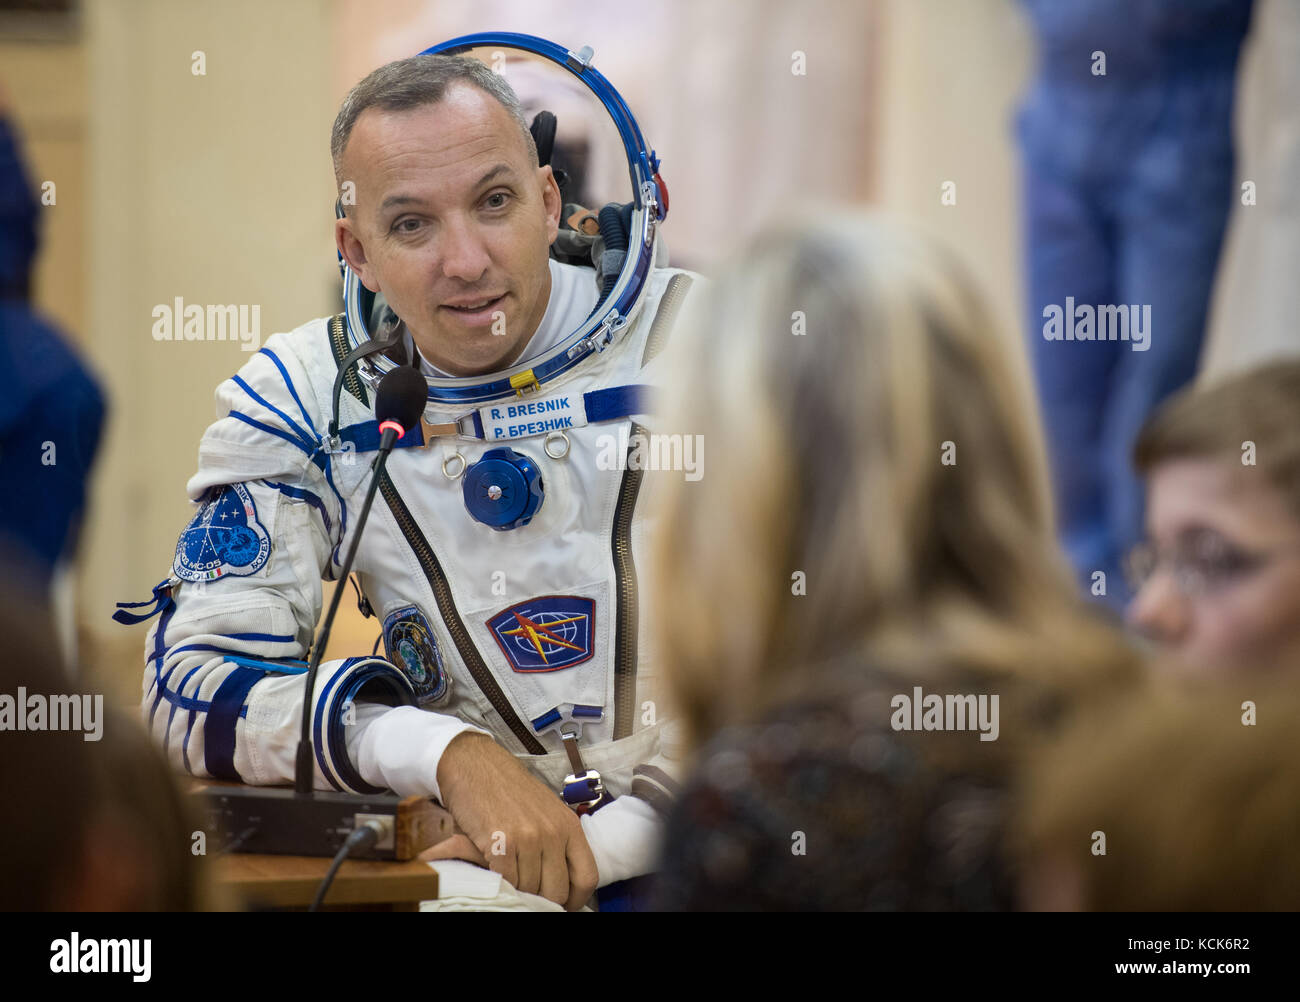 NASA International Space Station Expedition 52 prime crew member American astronaut Randy Bresnik talks to family and friends after having his Sokol spacesuit pressure checked in preparation for the Soyuz MS-05 launch at the Baikonur Cosmodrome July 28, 2017 in Baikonur, Kazakhstan.  (photo by Joel Kowsky  via Planetpix) Stock Photo